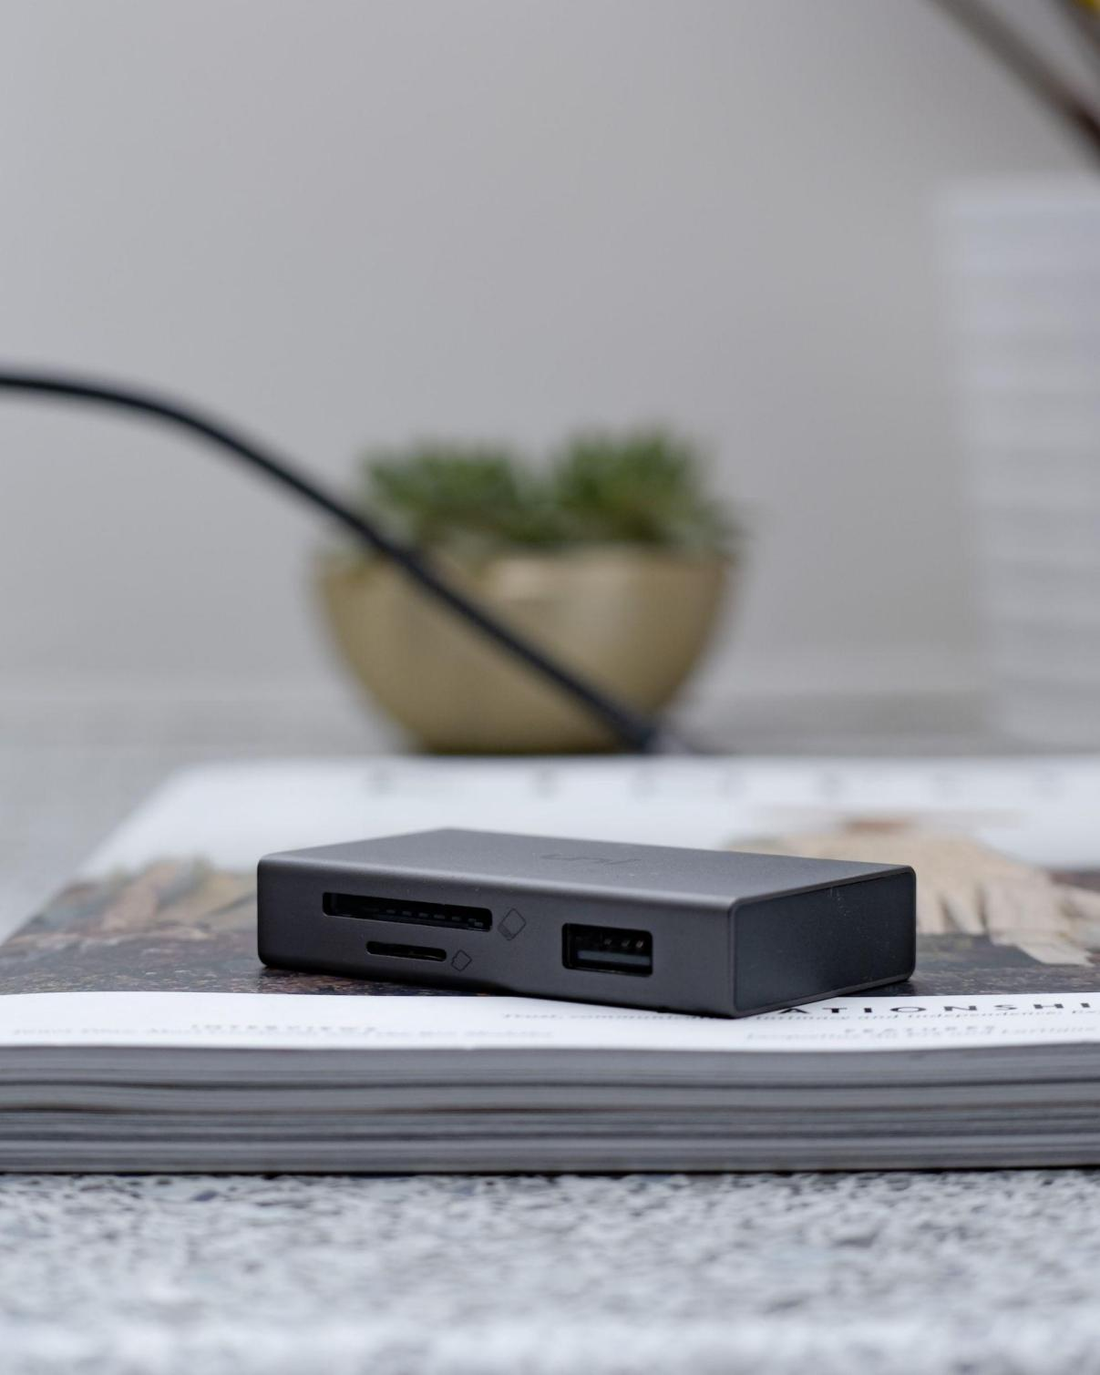 Why USB-C Hubs are Essential Tools for Home Office Productivity